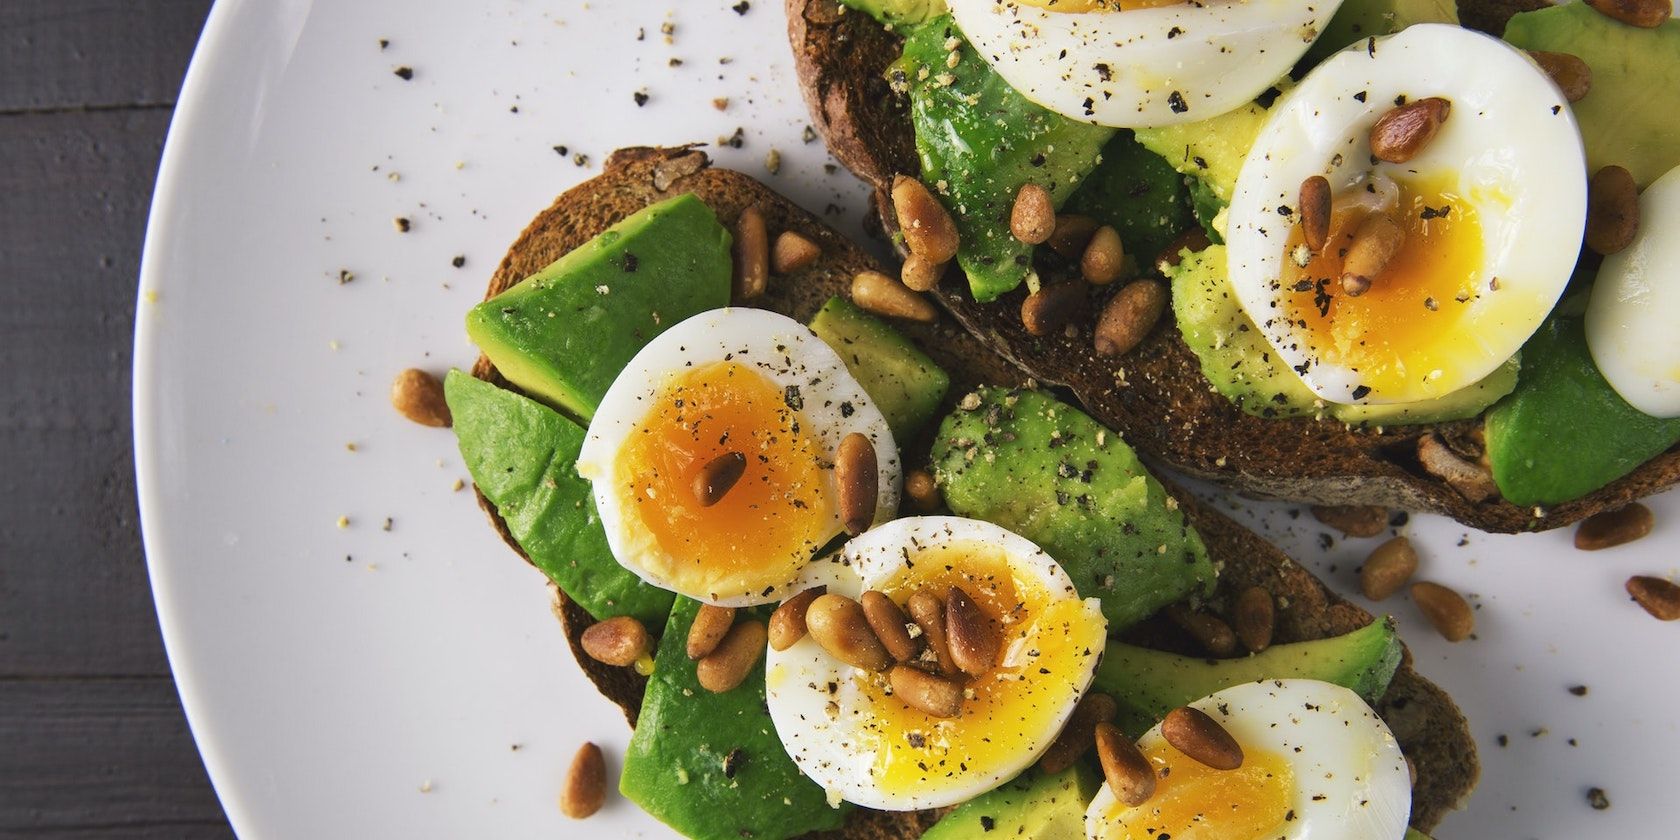 A plate of boiled eggs on toast with avocado